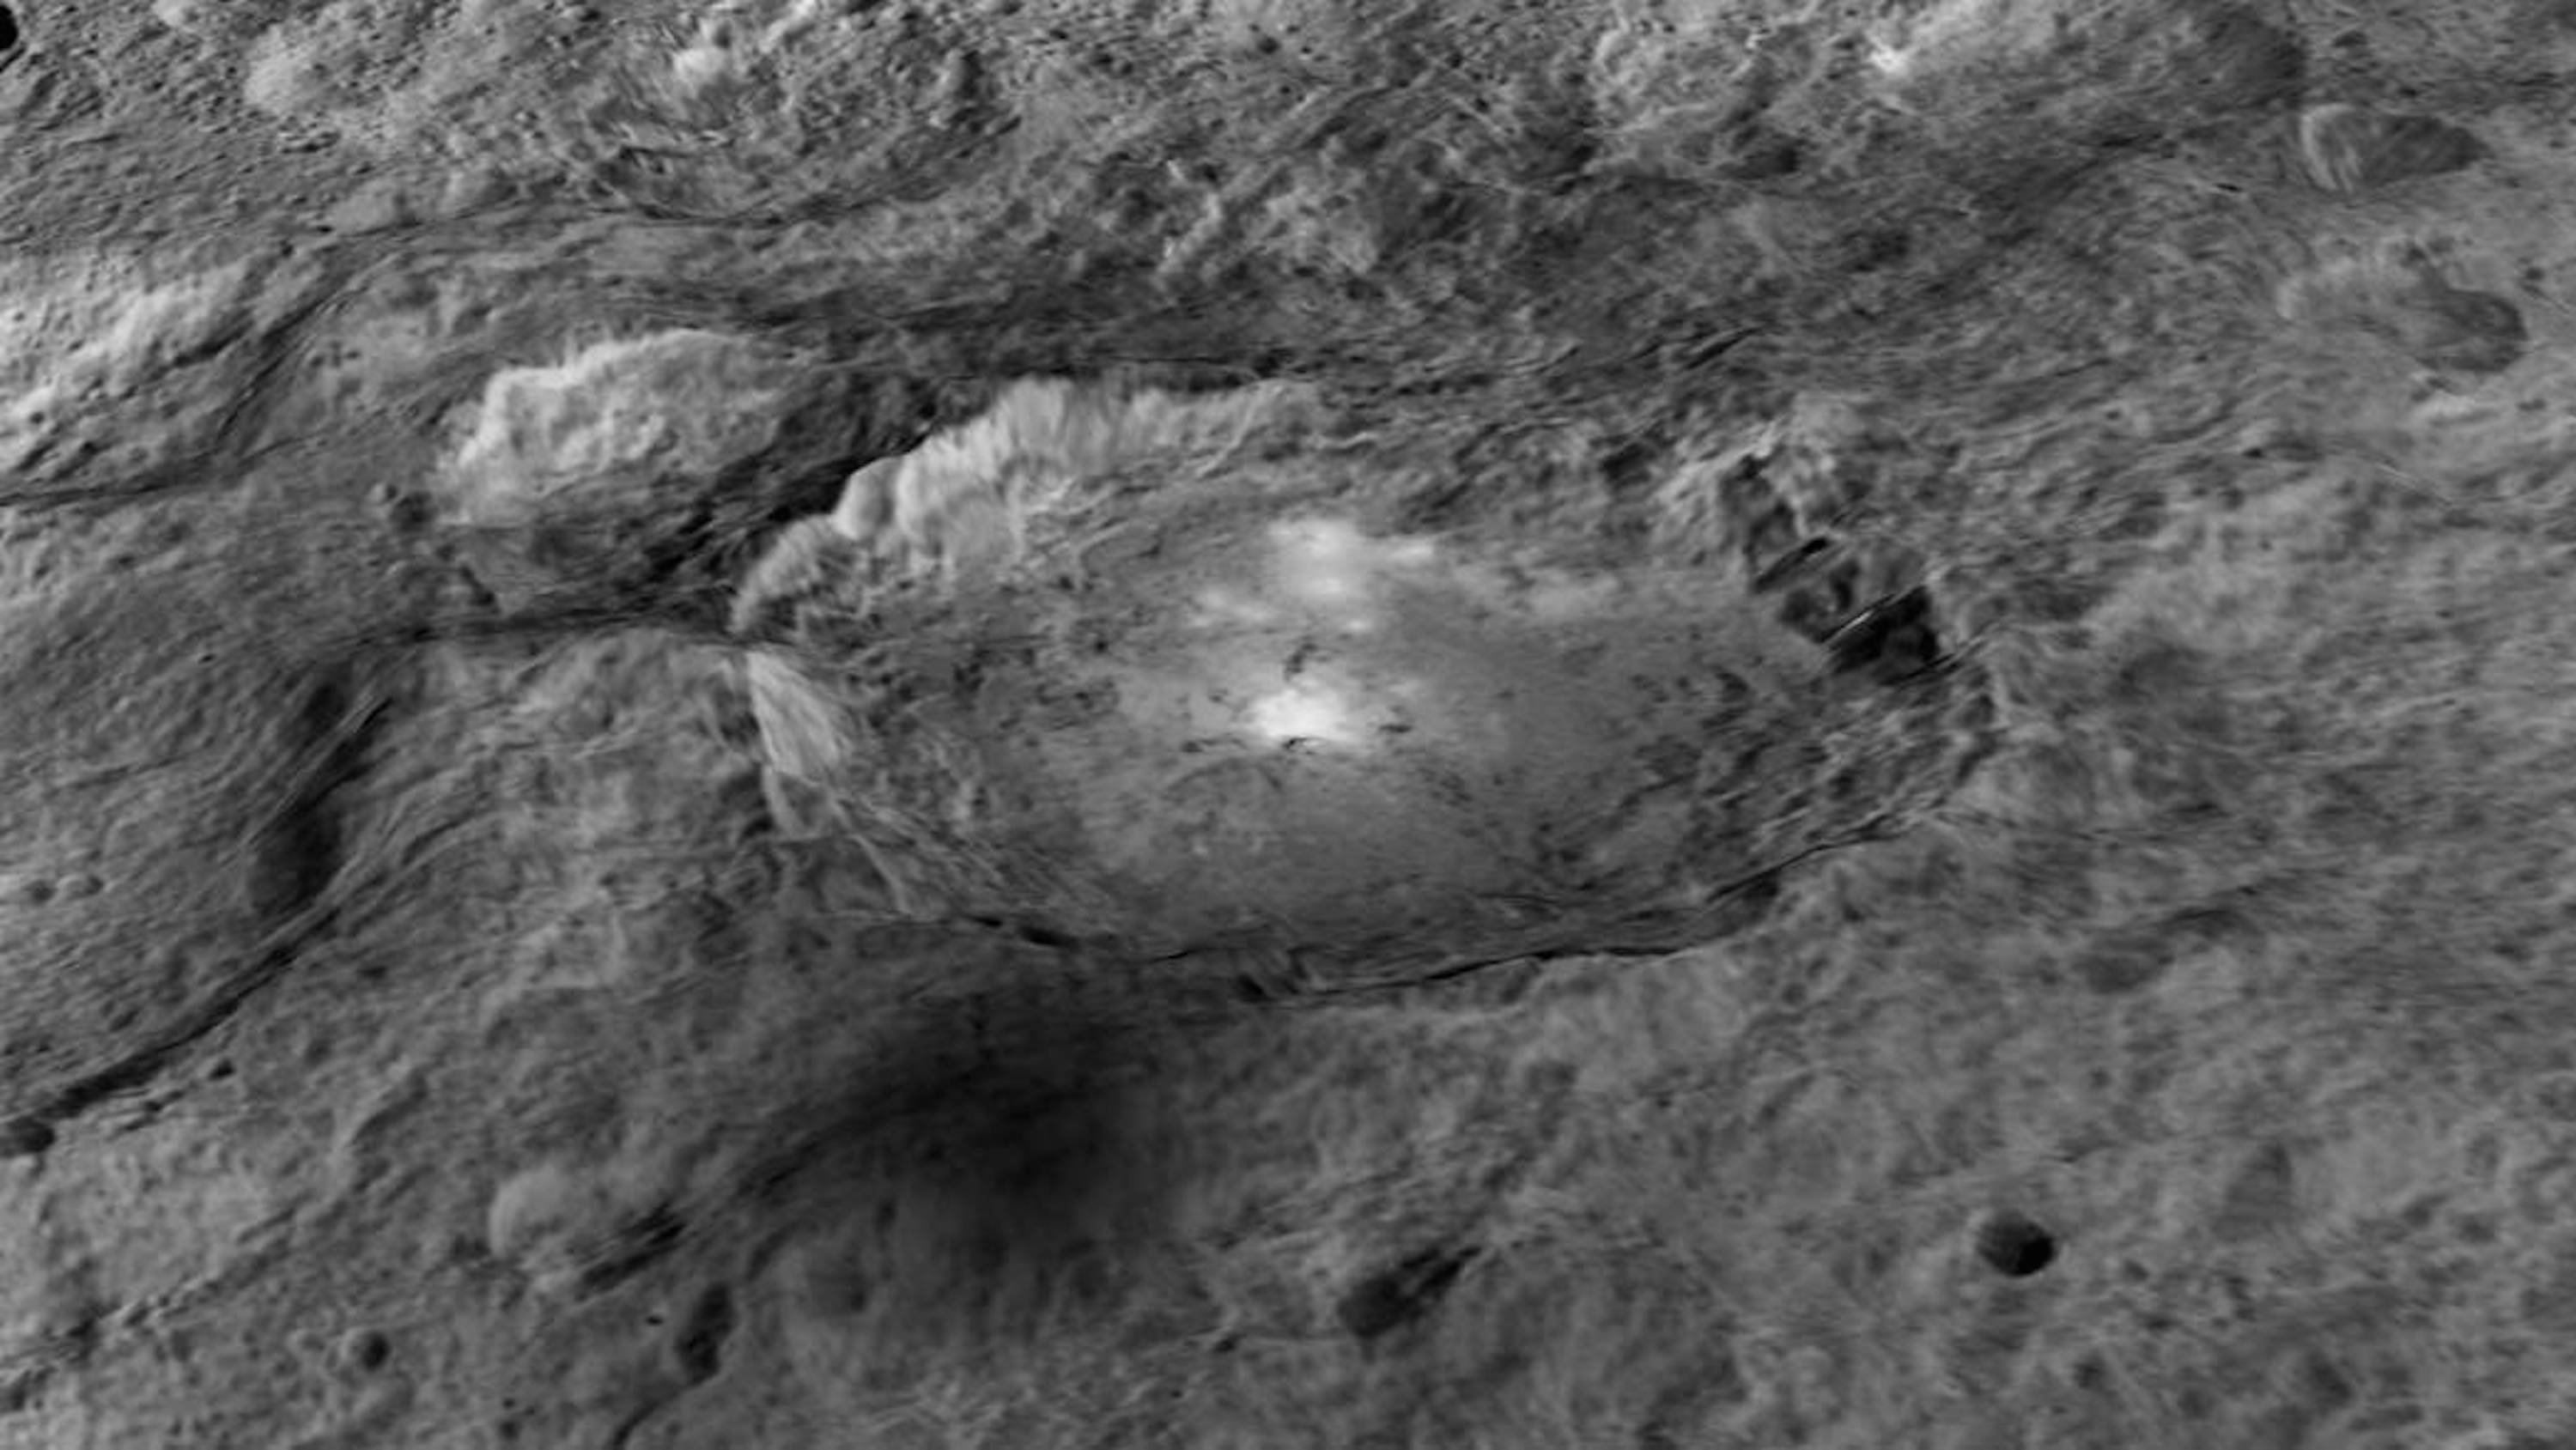 Ceres bright spot in in a crater named Occator, which is about 4 km deep